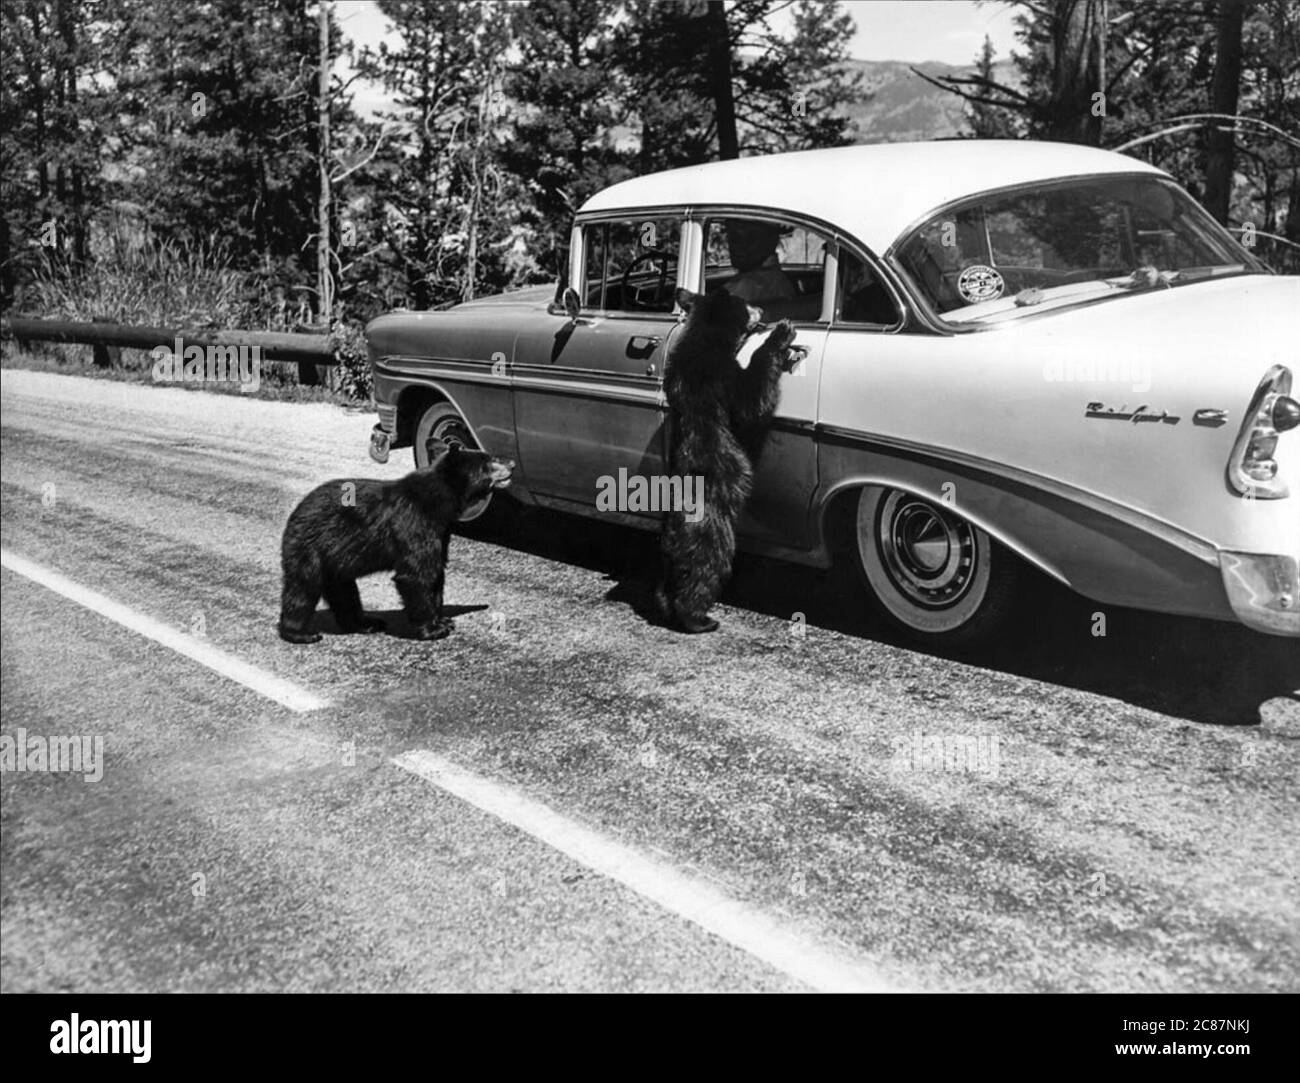 Bears begging for food at a car in Yellowstone National Park in August 1958. Stock Photo